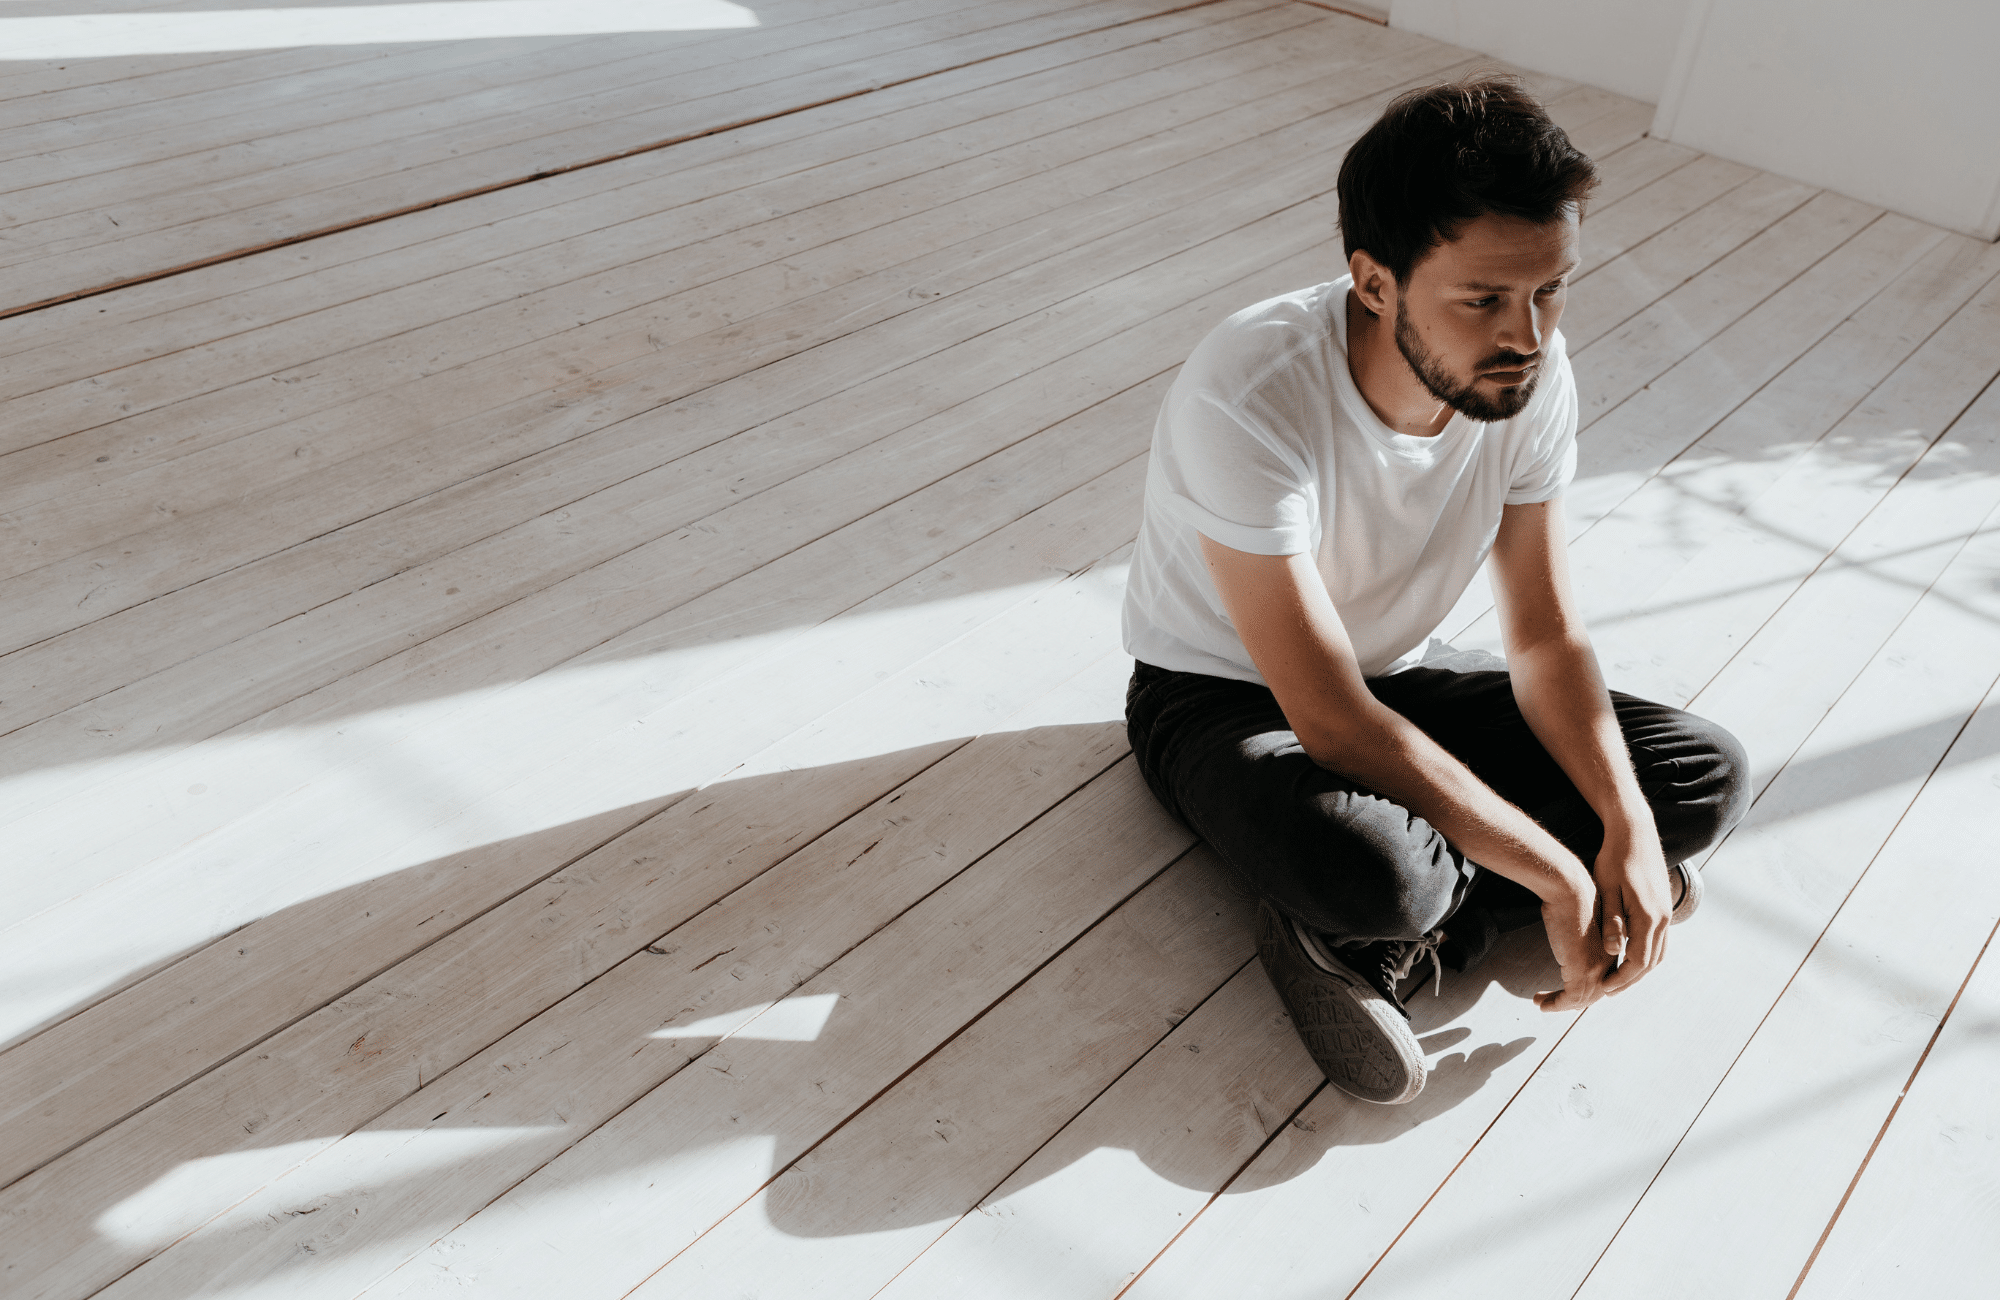 Image of a man sitting alone feeling isolated by trauma without Edmonton PTSD treatment and trauma therapy. A trauma therapist can help you start connecting with your loved ones again through PTSD treatment in Sherwood Park, Alberta.